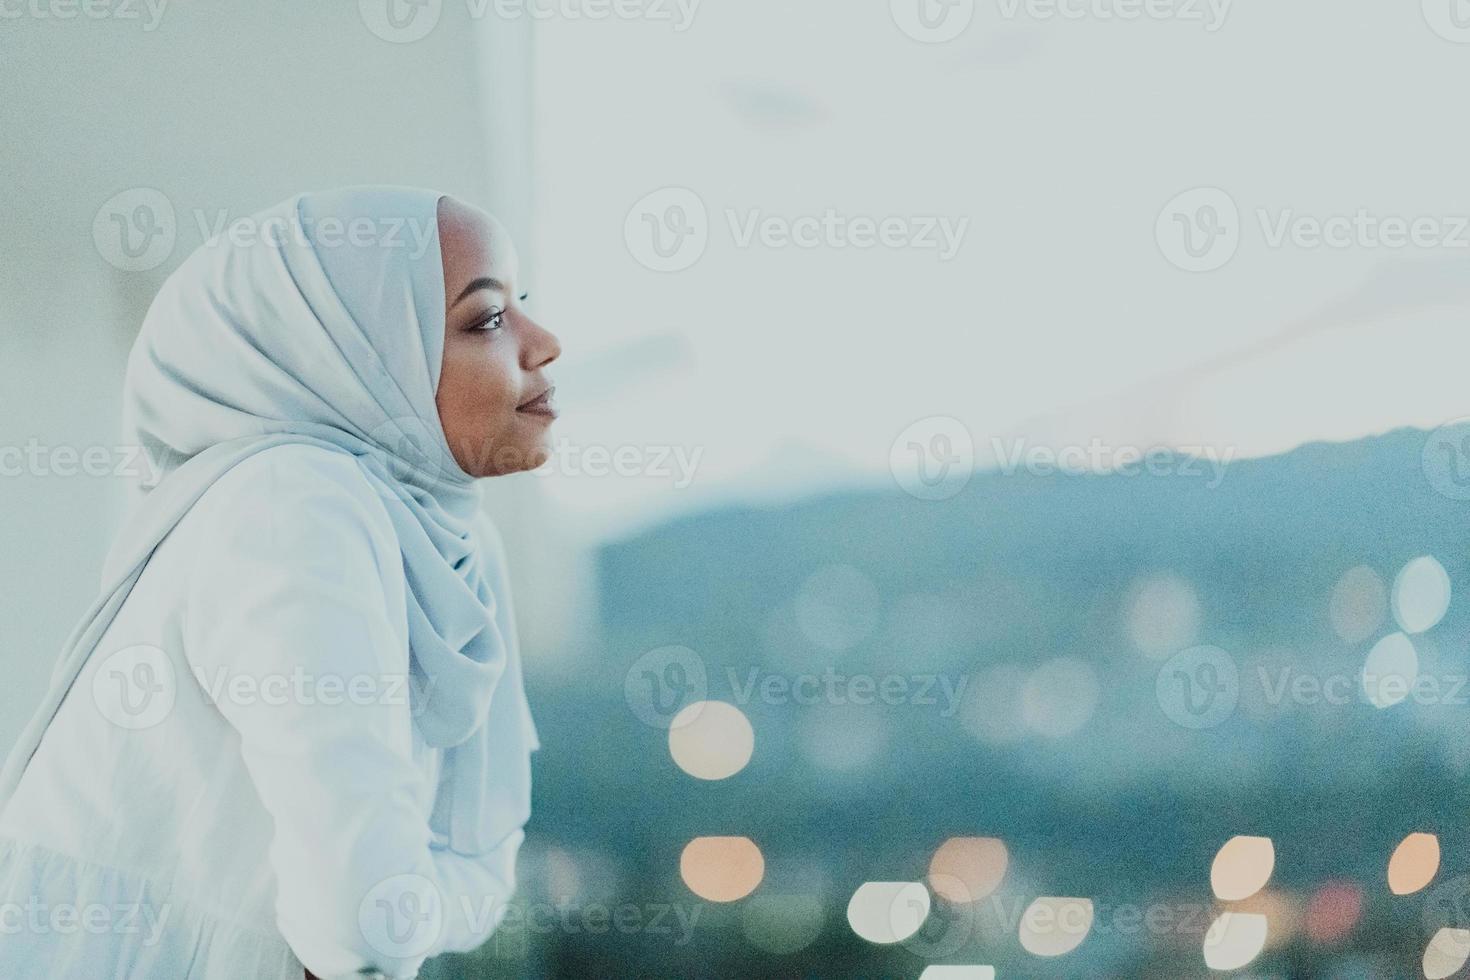 African Muslim woman in the night on a balcony smiling at the camera with city bokeh lights in the background. photo